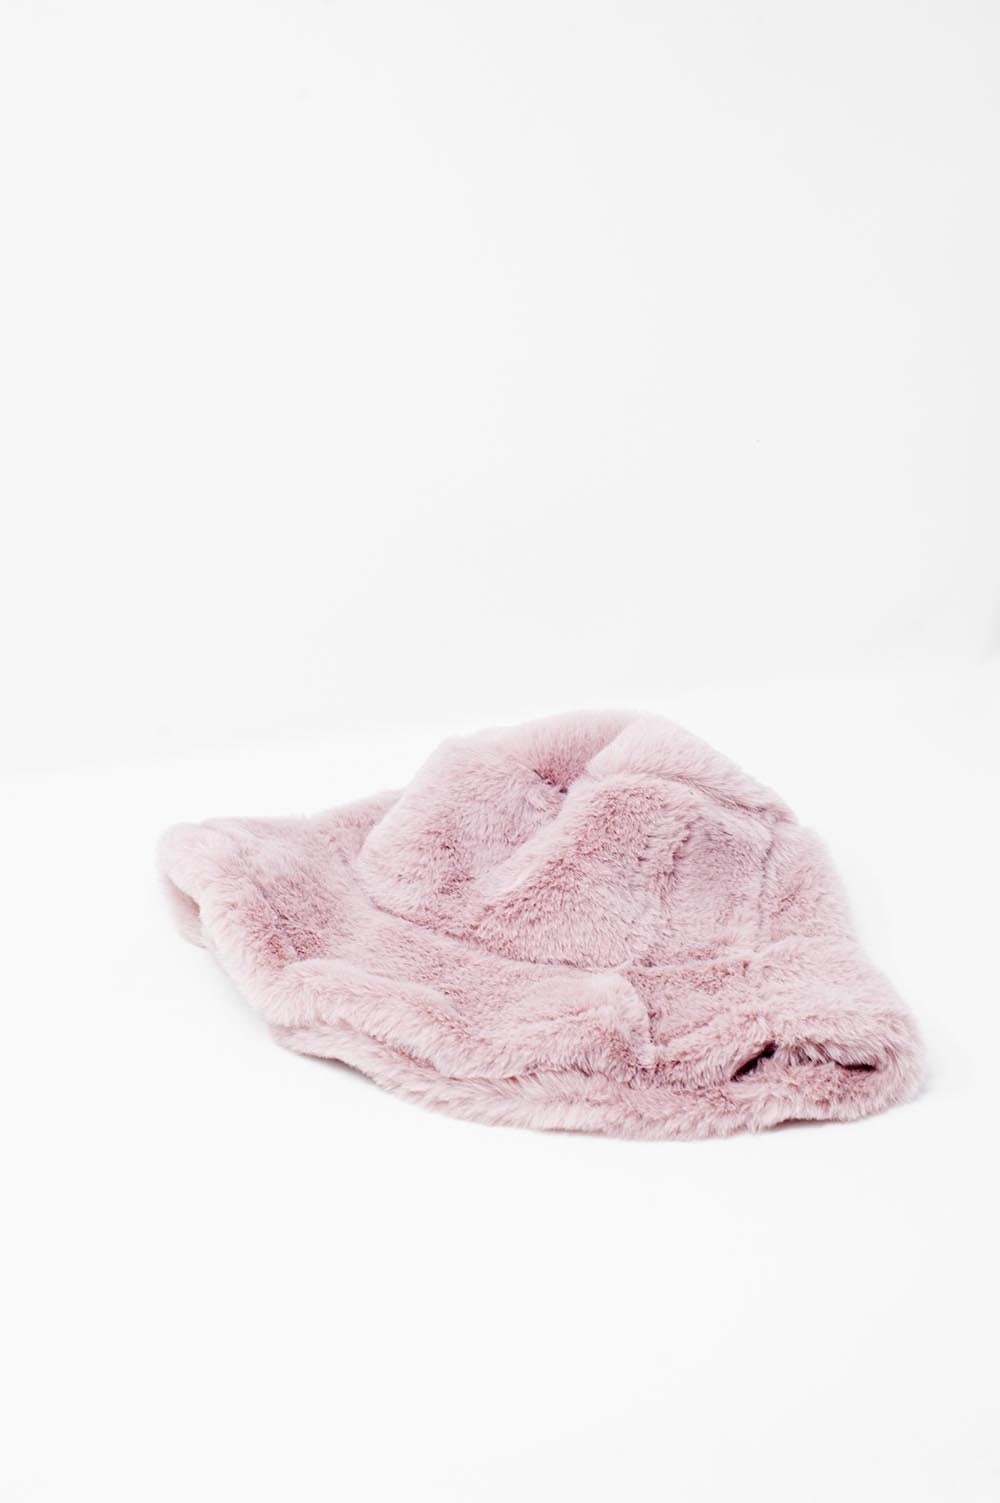 Reversible bucket hat in pink with teddy turn up Szua Store